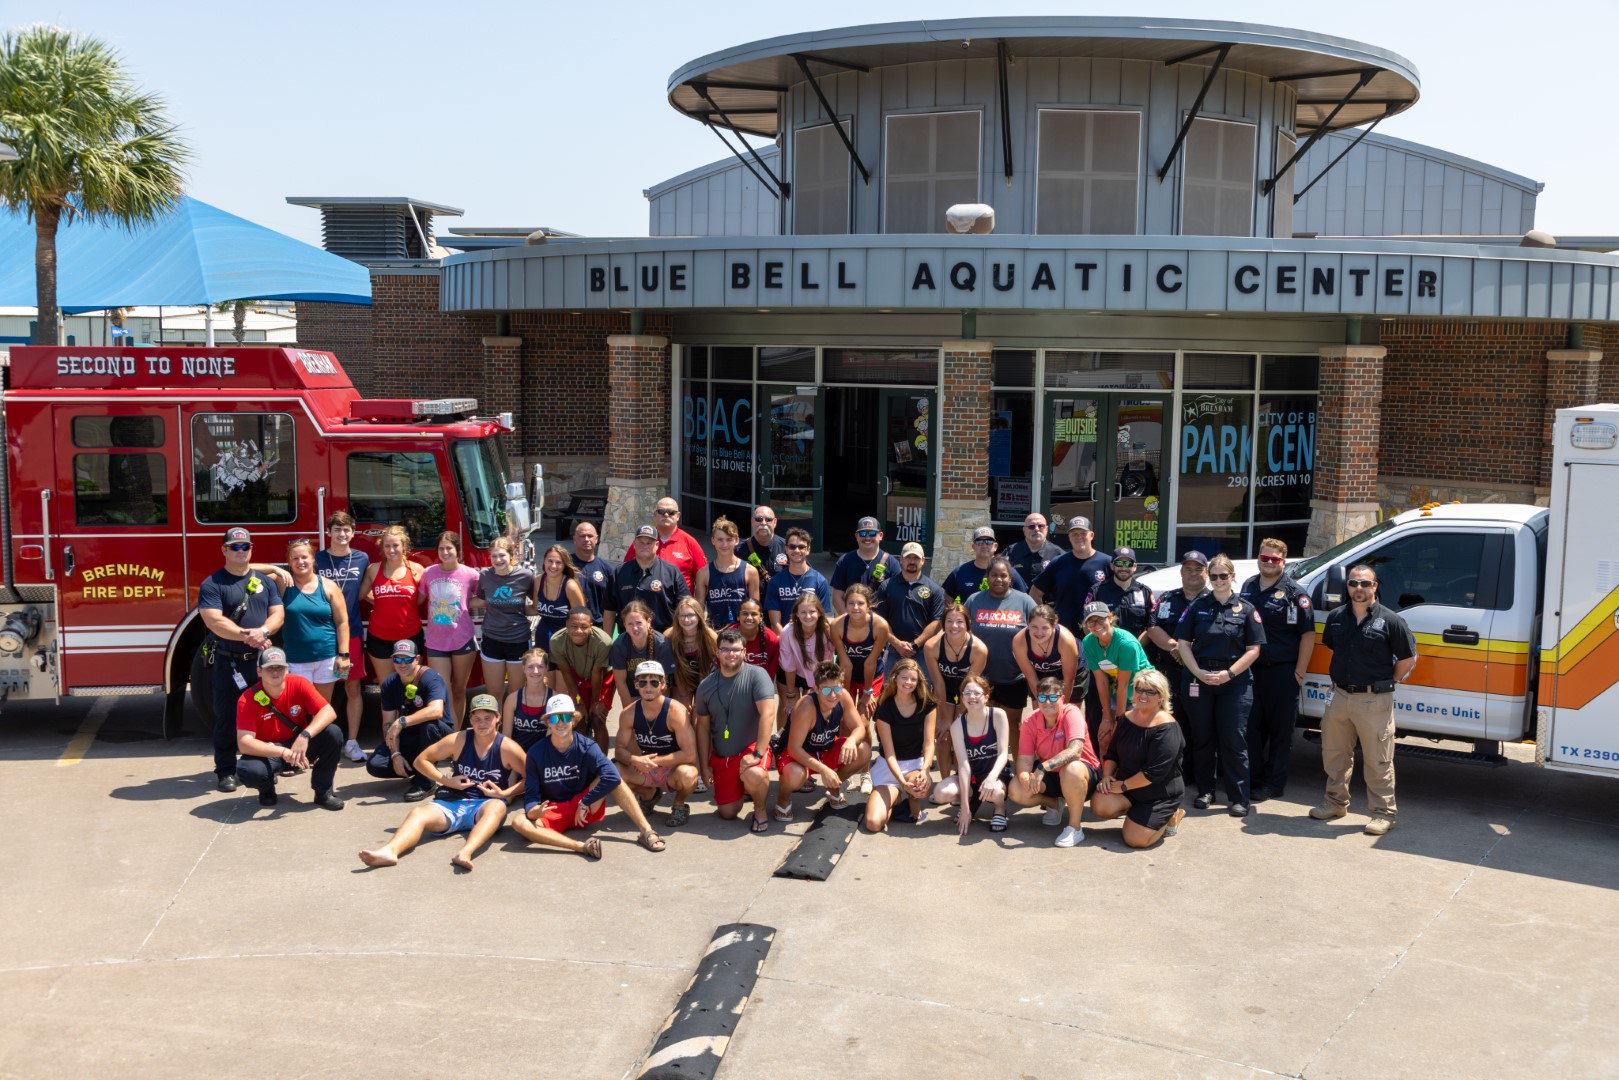 group picture of firefighters, lifeguards, and ems staff in front of a fire truck and ambulance in front of the aquatic center building